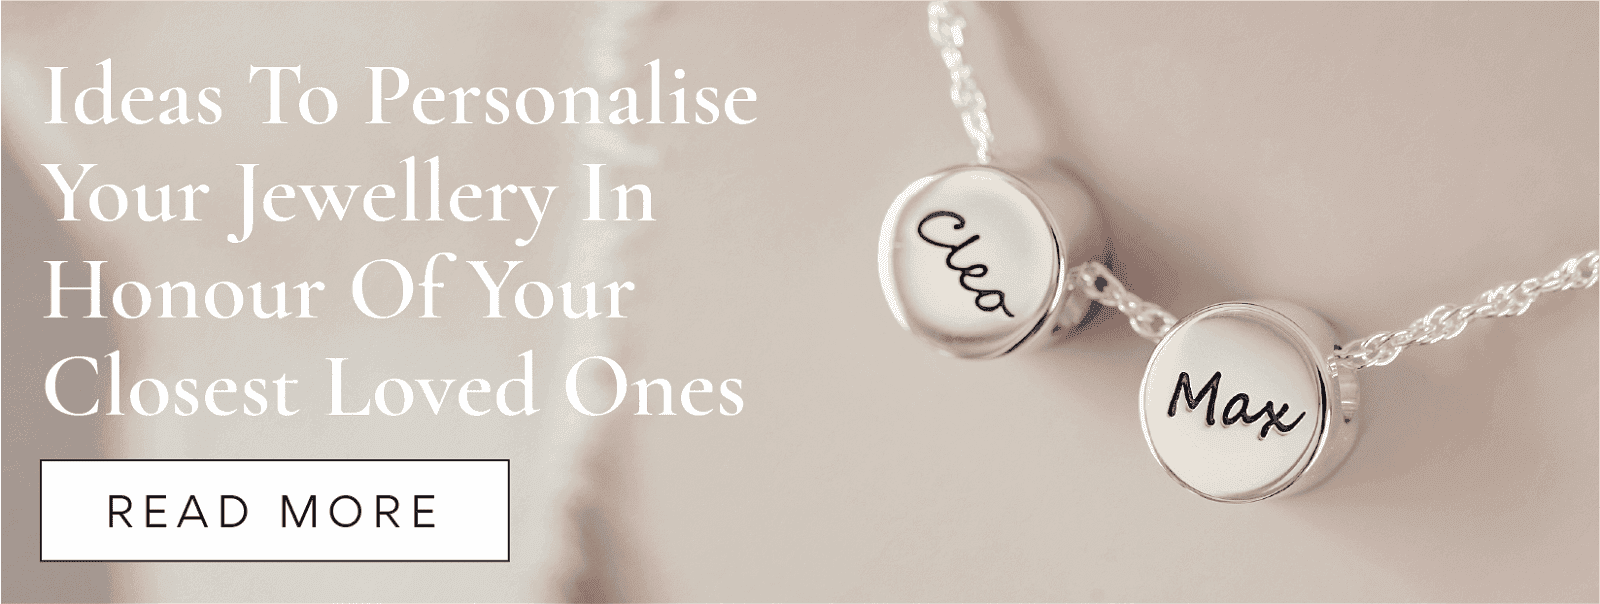 Ideas To Personalise Your Jewellery In Honour Of Your Closest Loved Ones